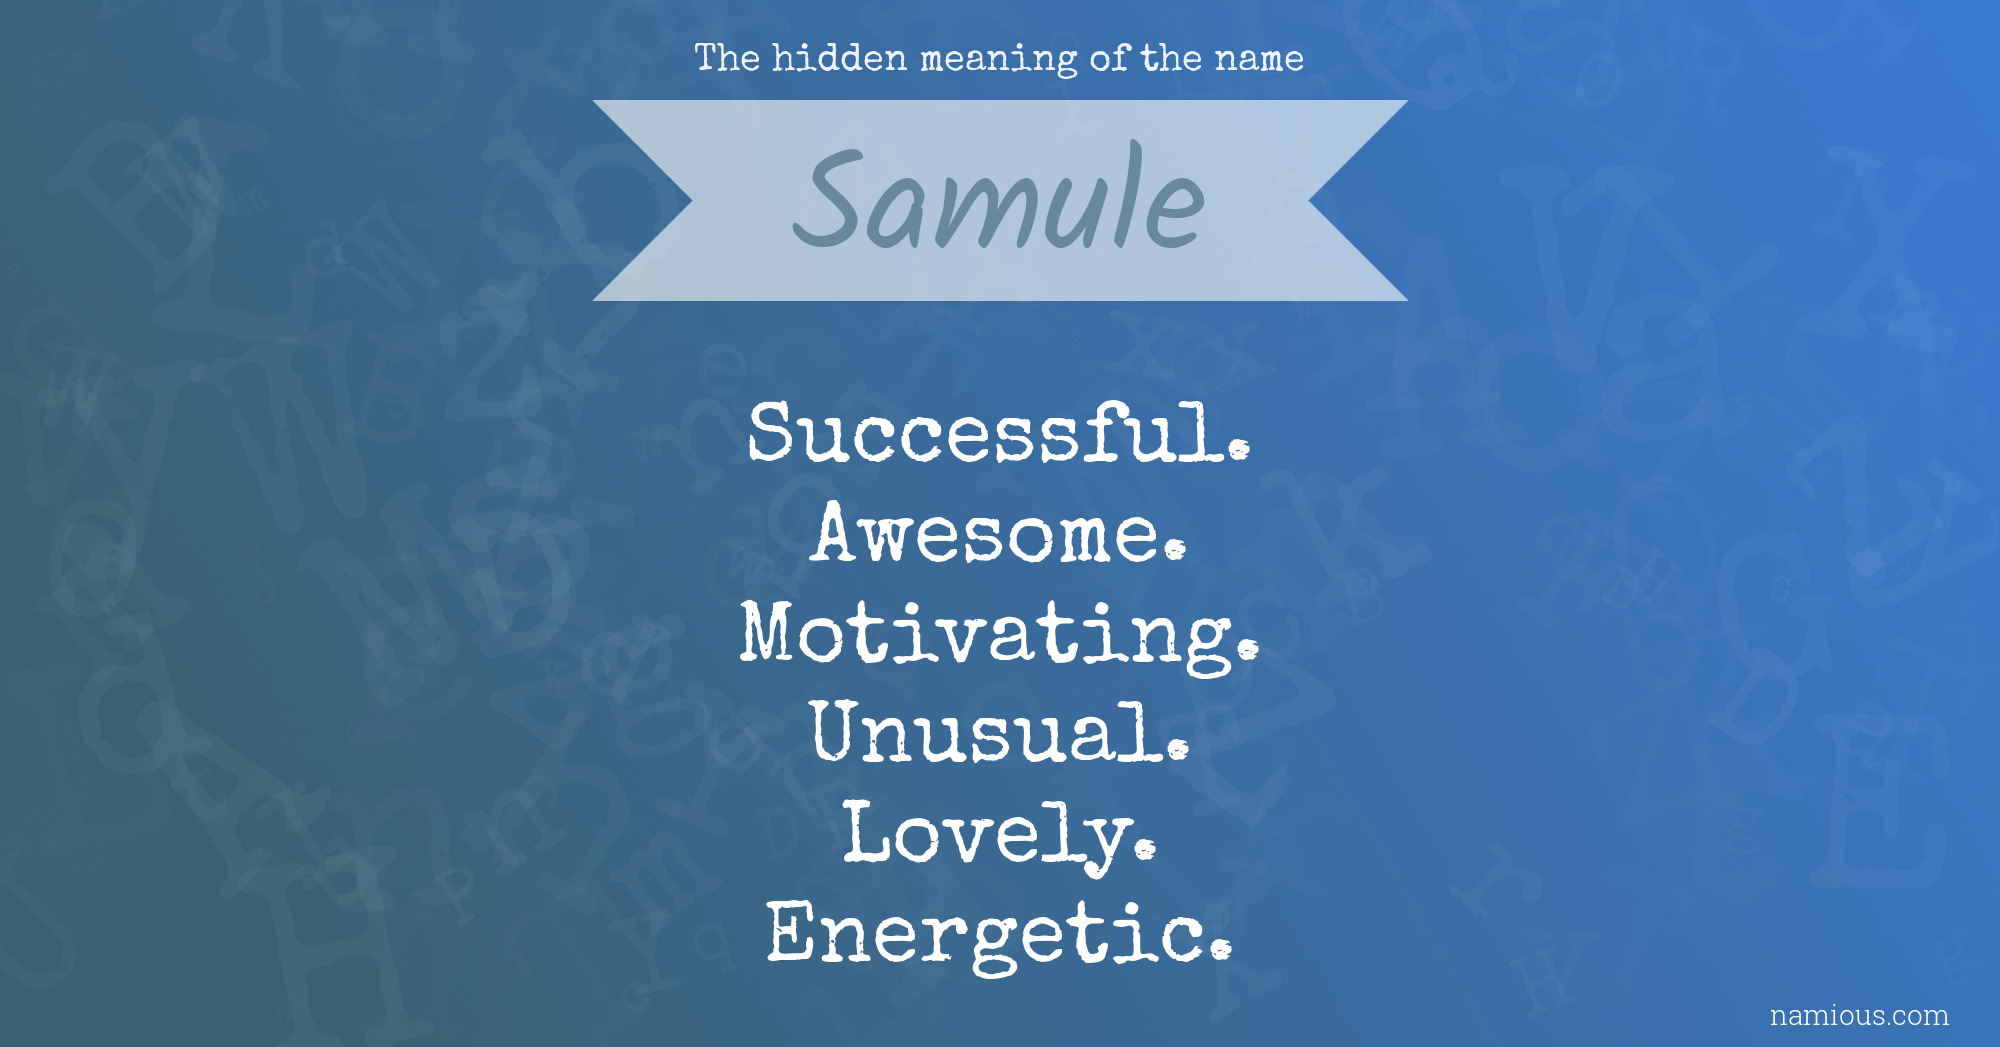 The hidden meaning of the name Samule